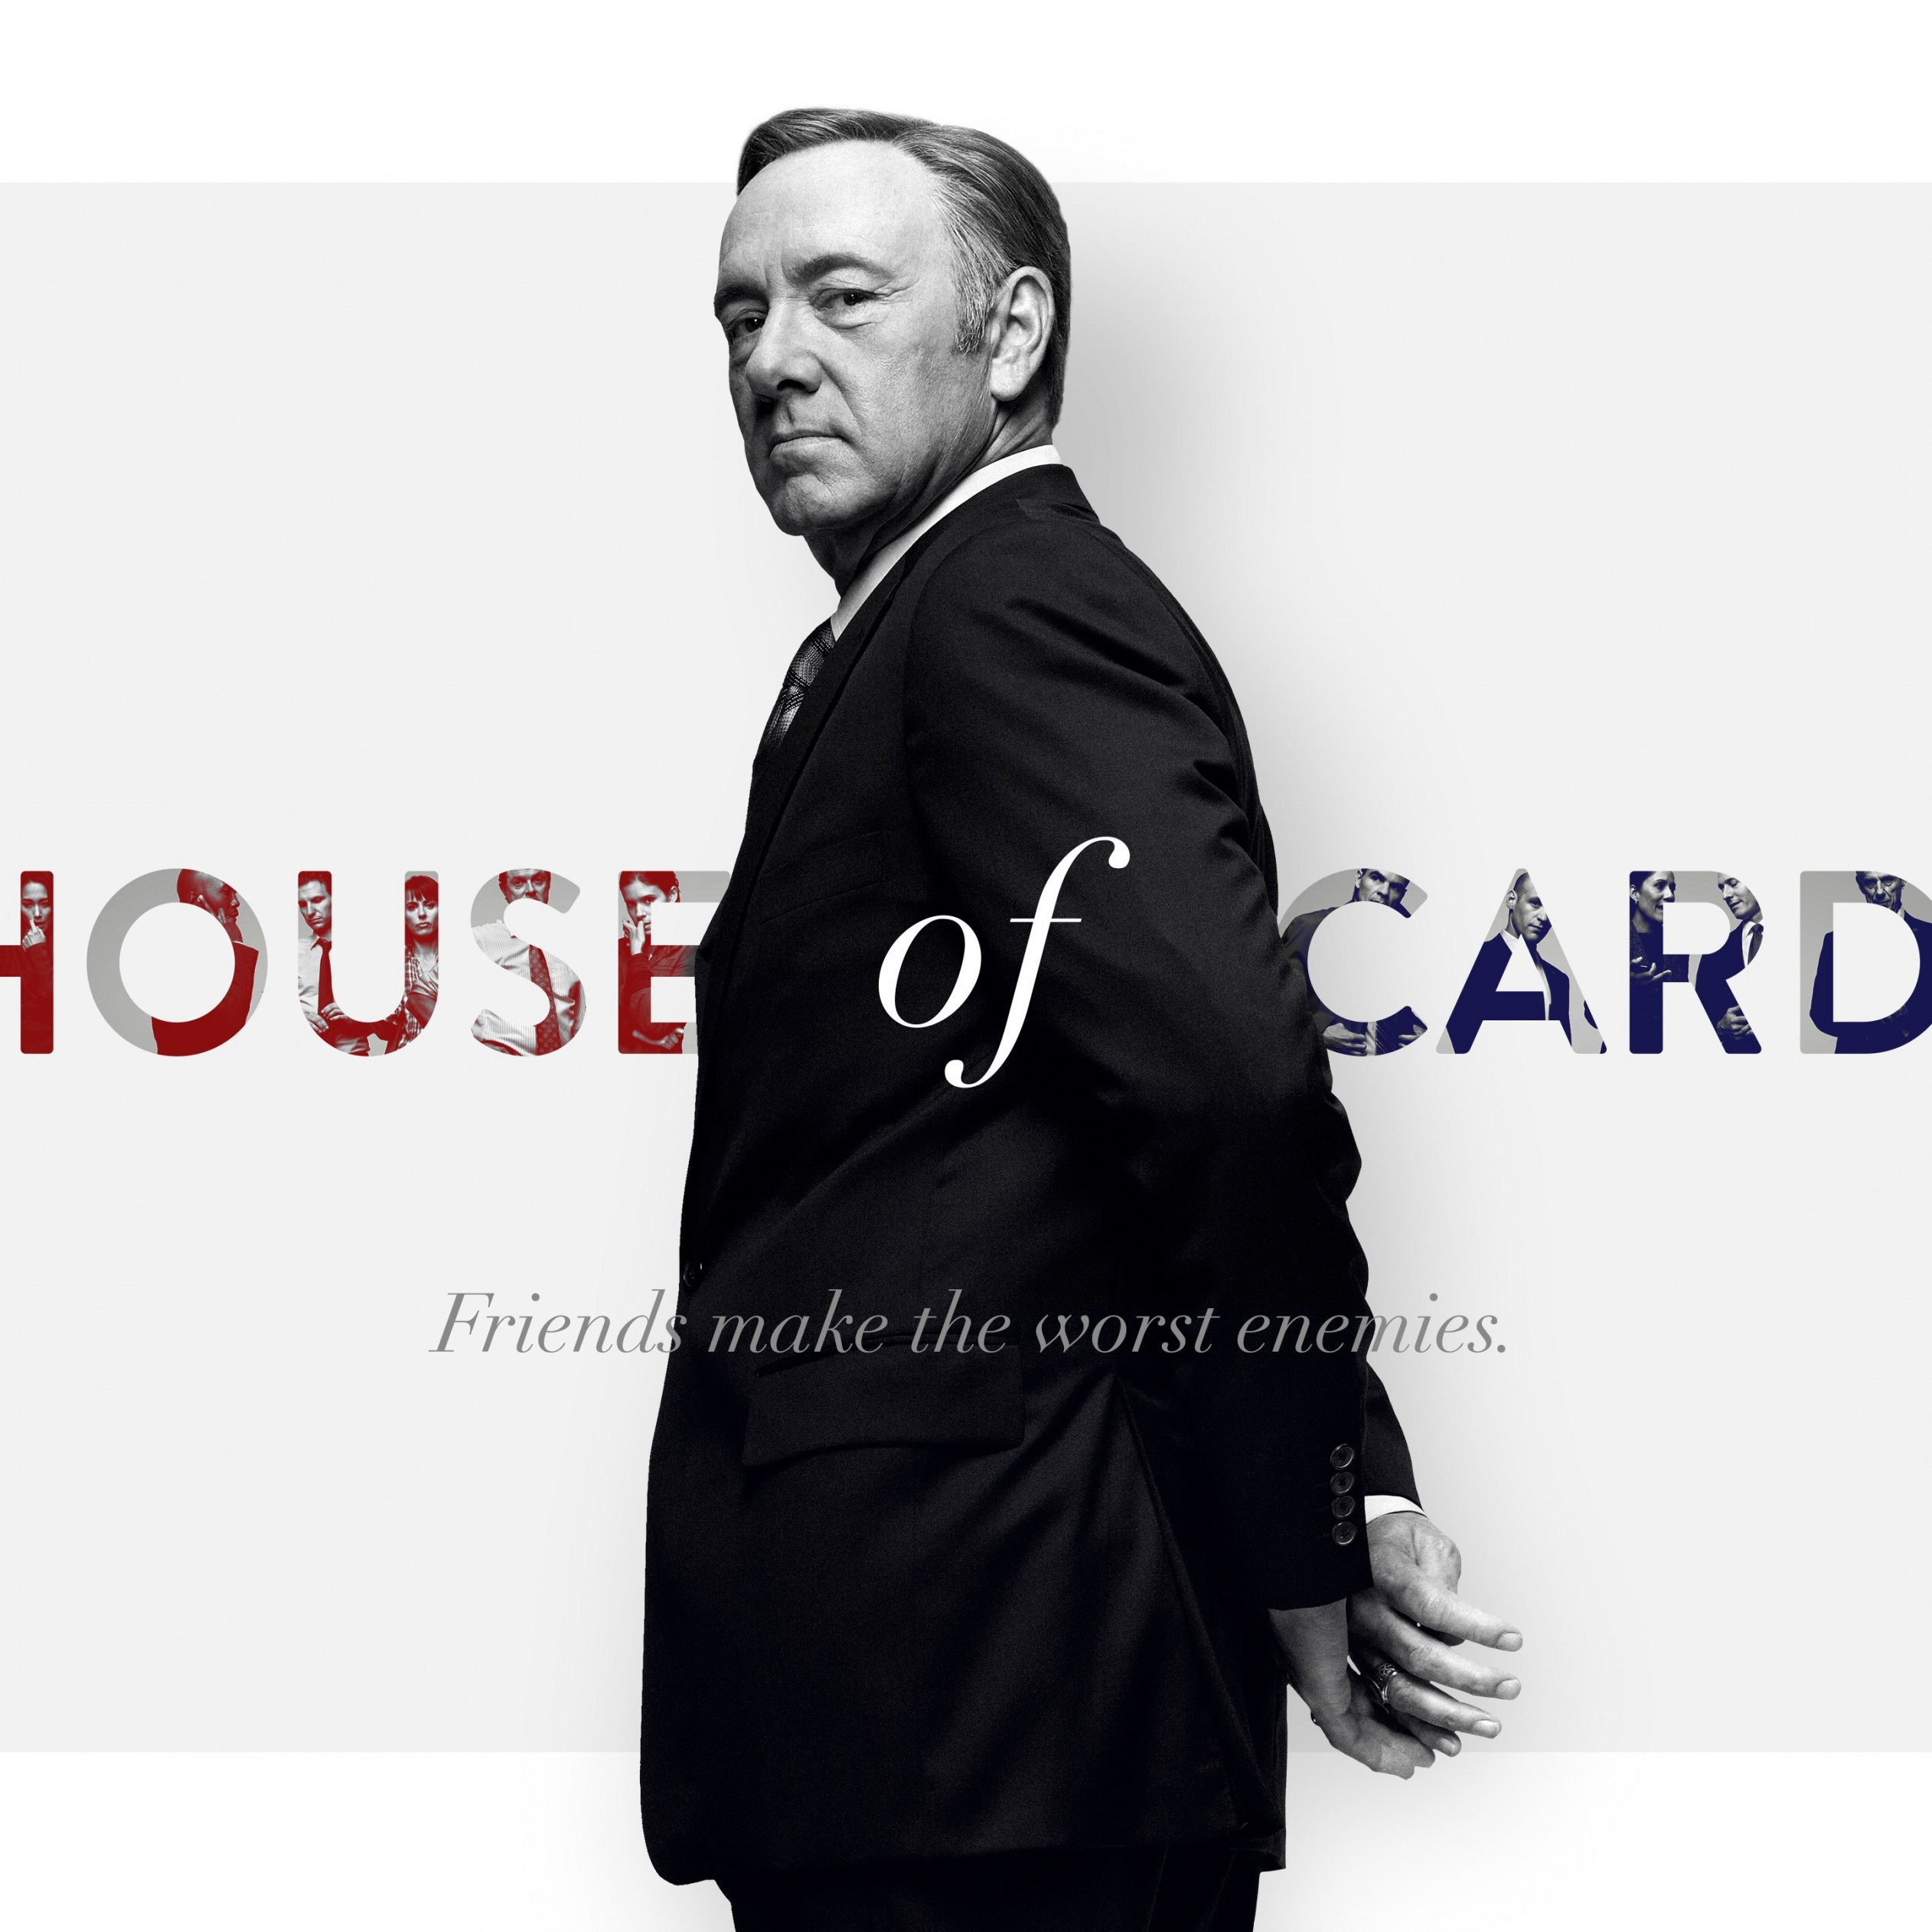 Frank Underwood - House of Cards Wallpaper for Apple iPad 3